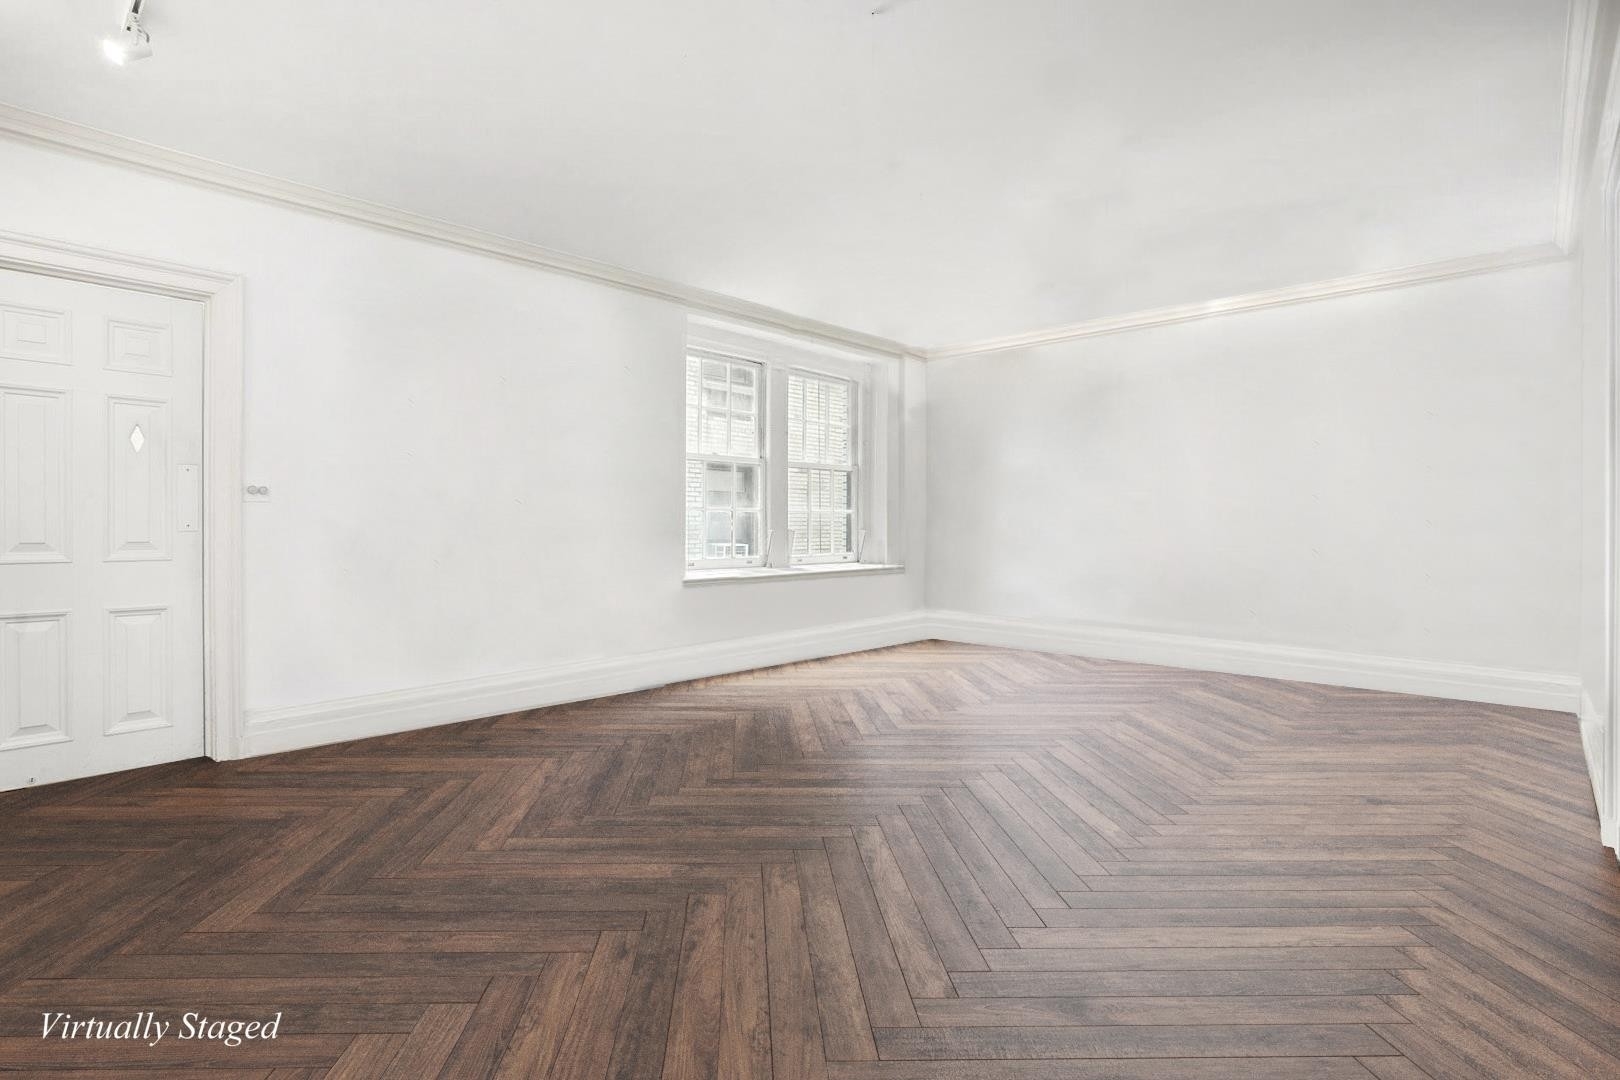 4. Co-op Properties for Sale at 447 E 57TH ST, 9TH Sutton Place, New York, NY 10022